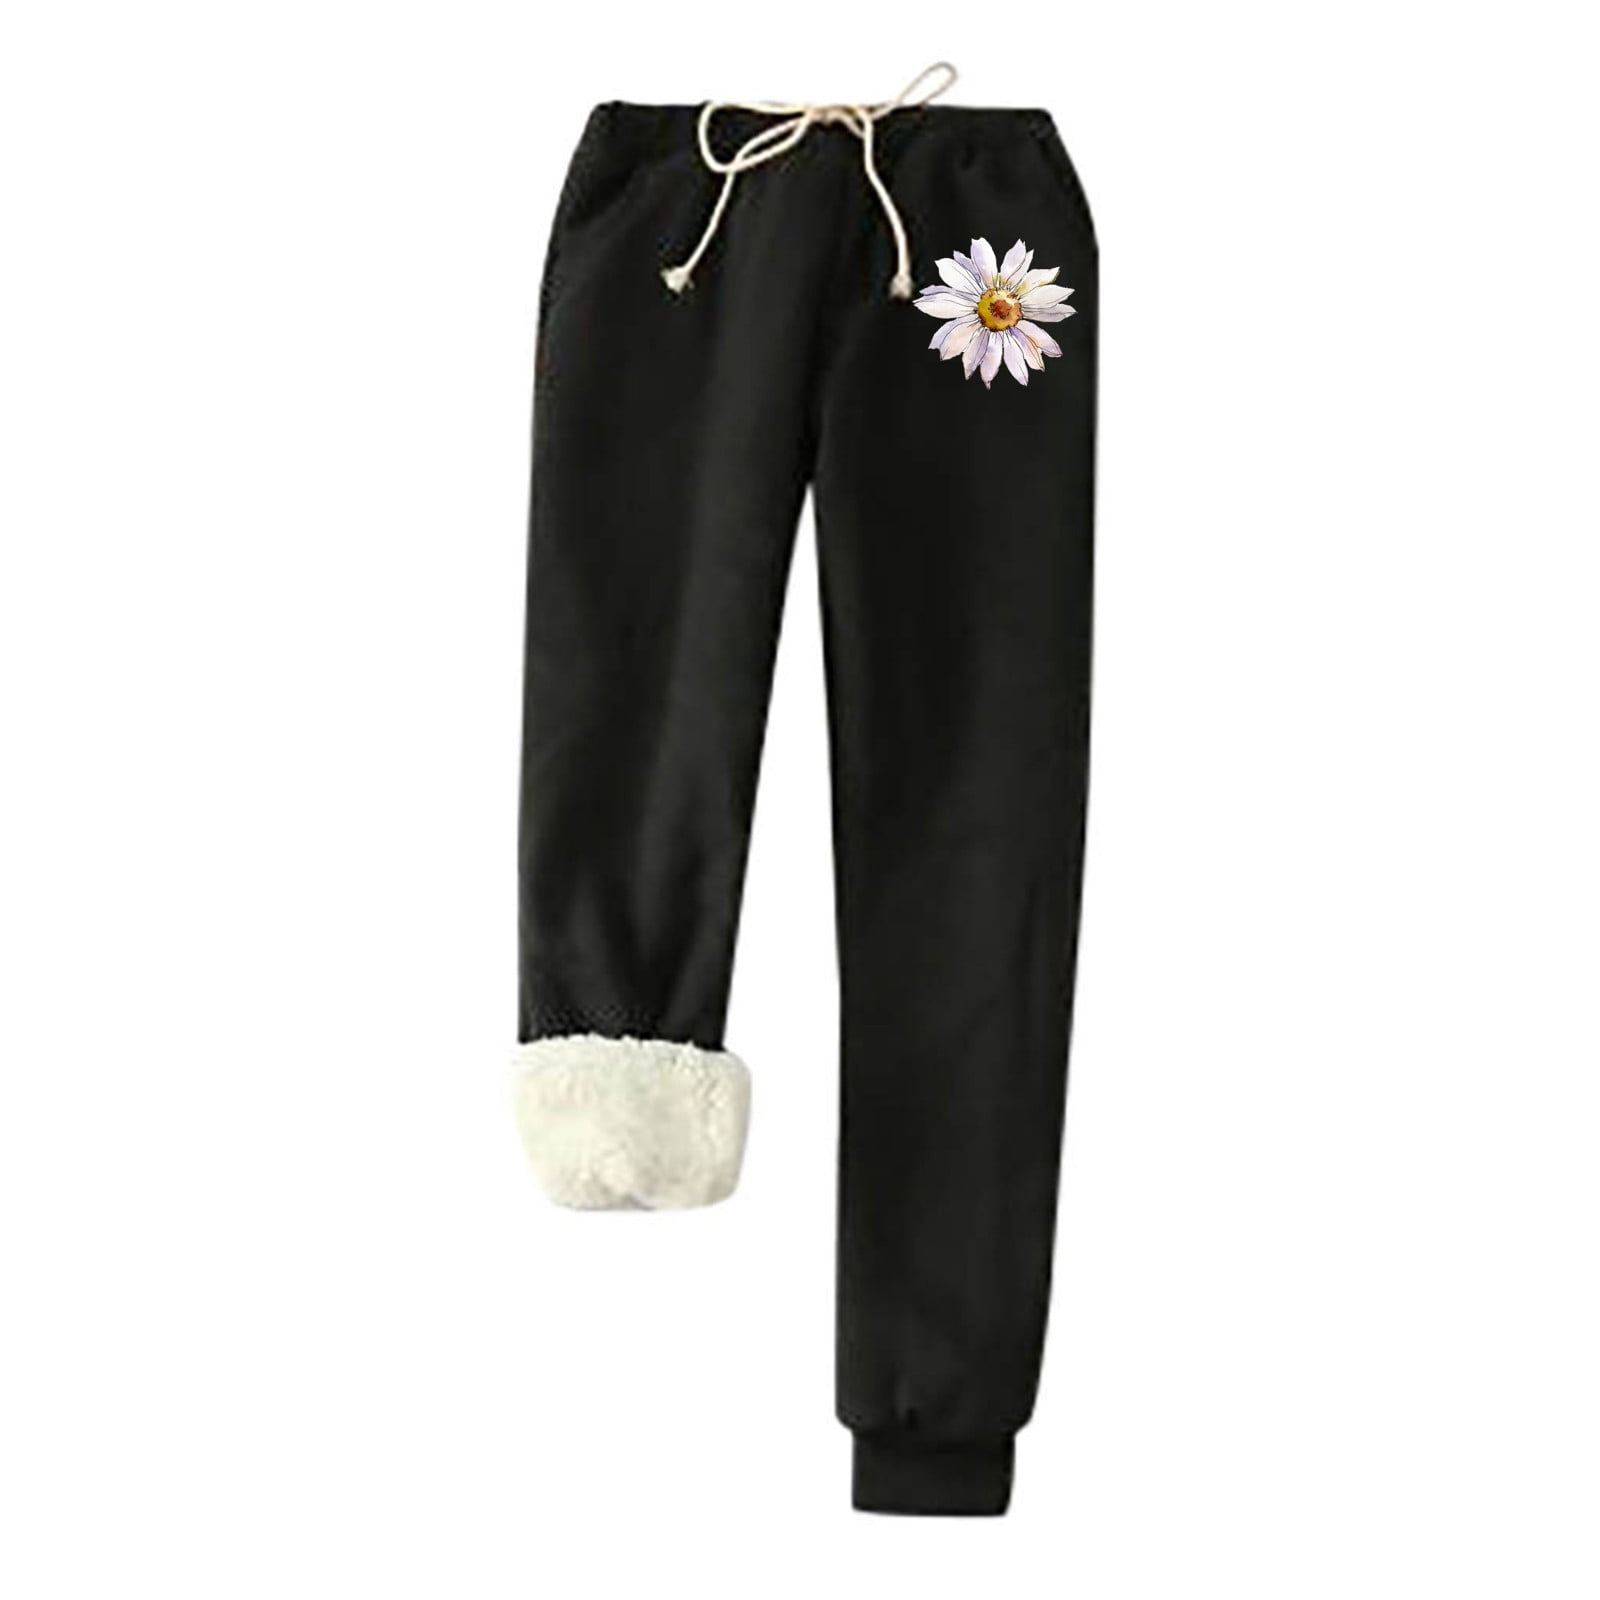 Zodggu Fleece Cashmere Lined Winter Warm Thick Thermal Drawstring Pants Sweatpants For Women